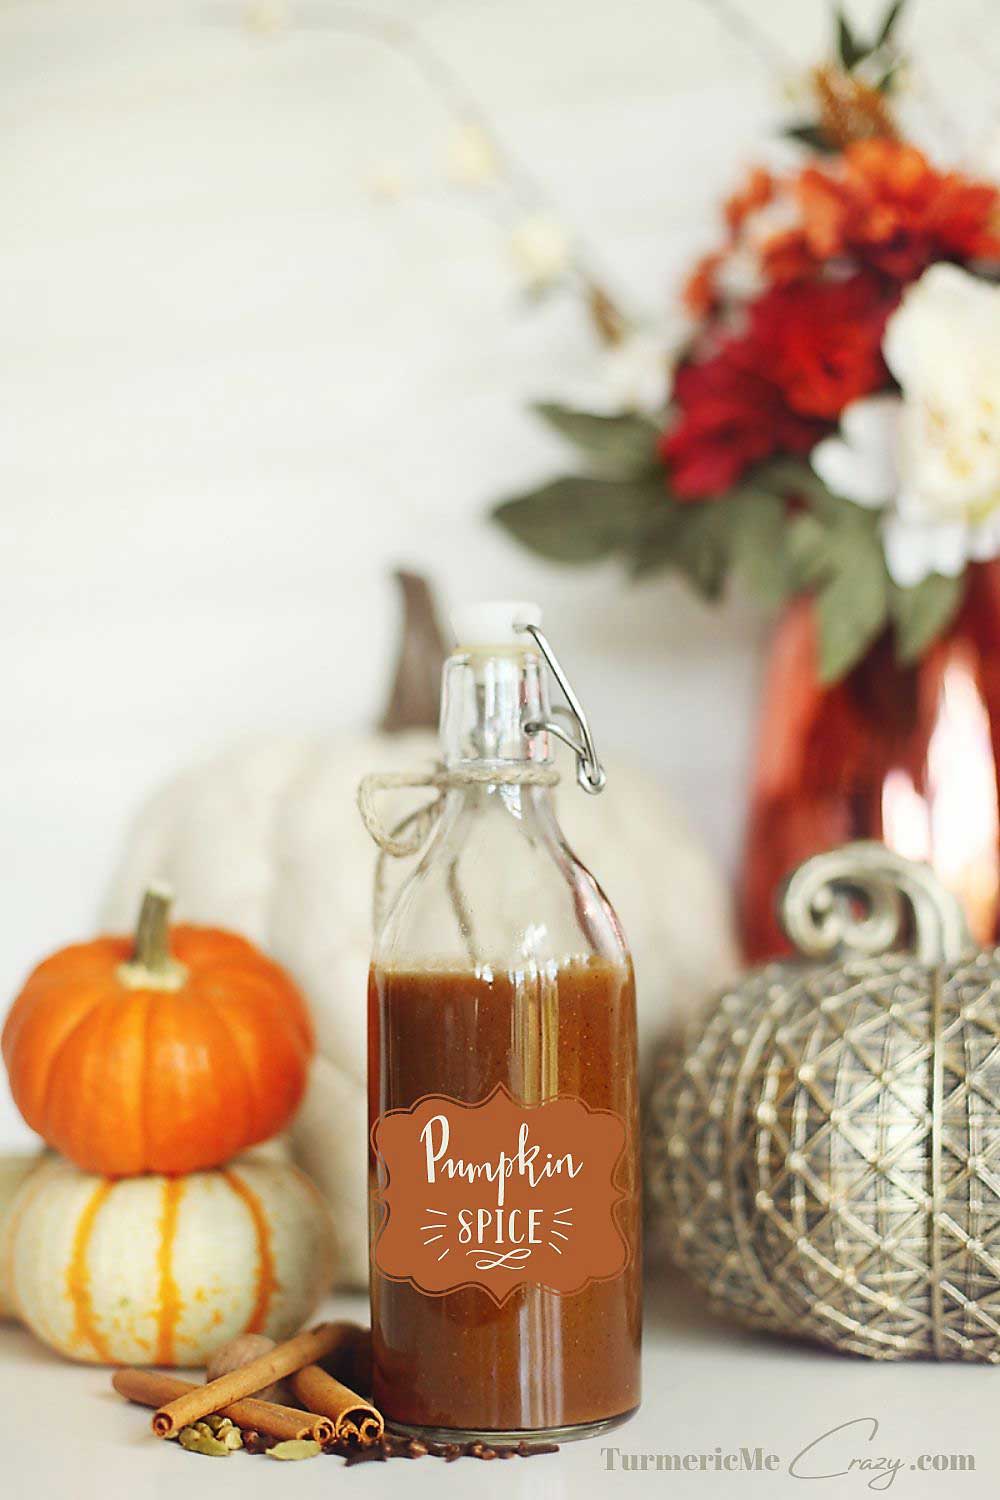 Everything pumpkin spice is nice with this perfect pumpkin spice syrup. Make a Healthy Pumpkin Spice Latte to rival Starbucks without all of the added processed sugars & additives! Add this syrup to your favourite dessert to make a pumpkin spice recipe of your own! Gluten Free, Pumpkin Spice Mix, Pumpkin spice recipes